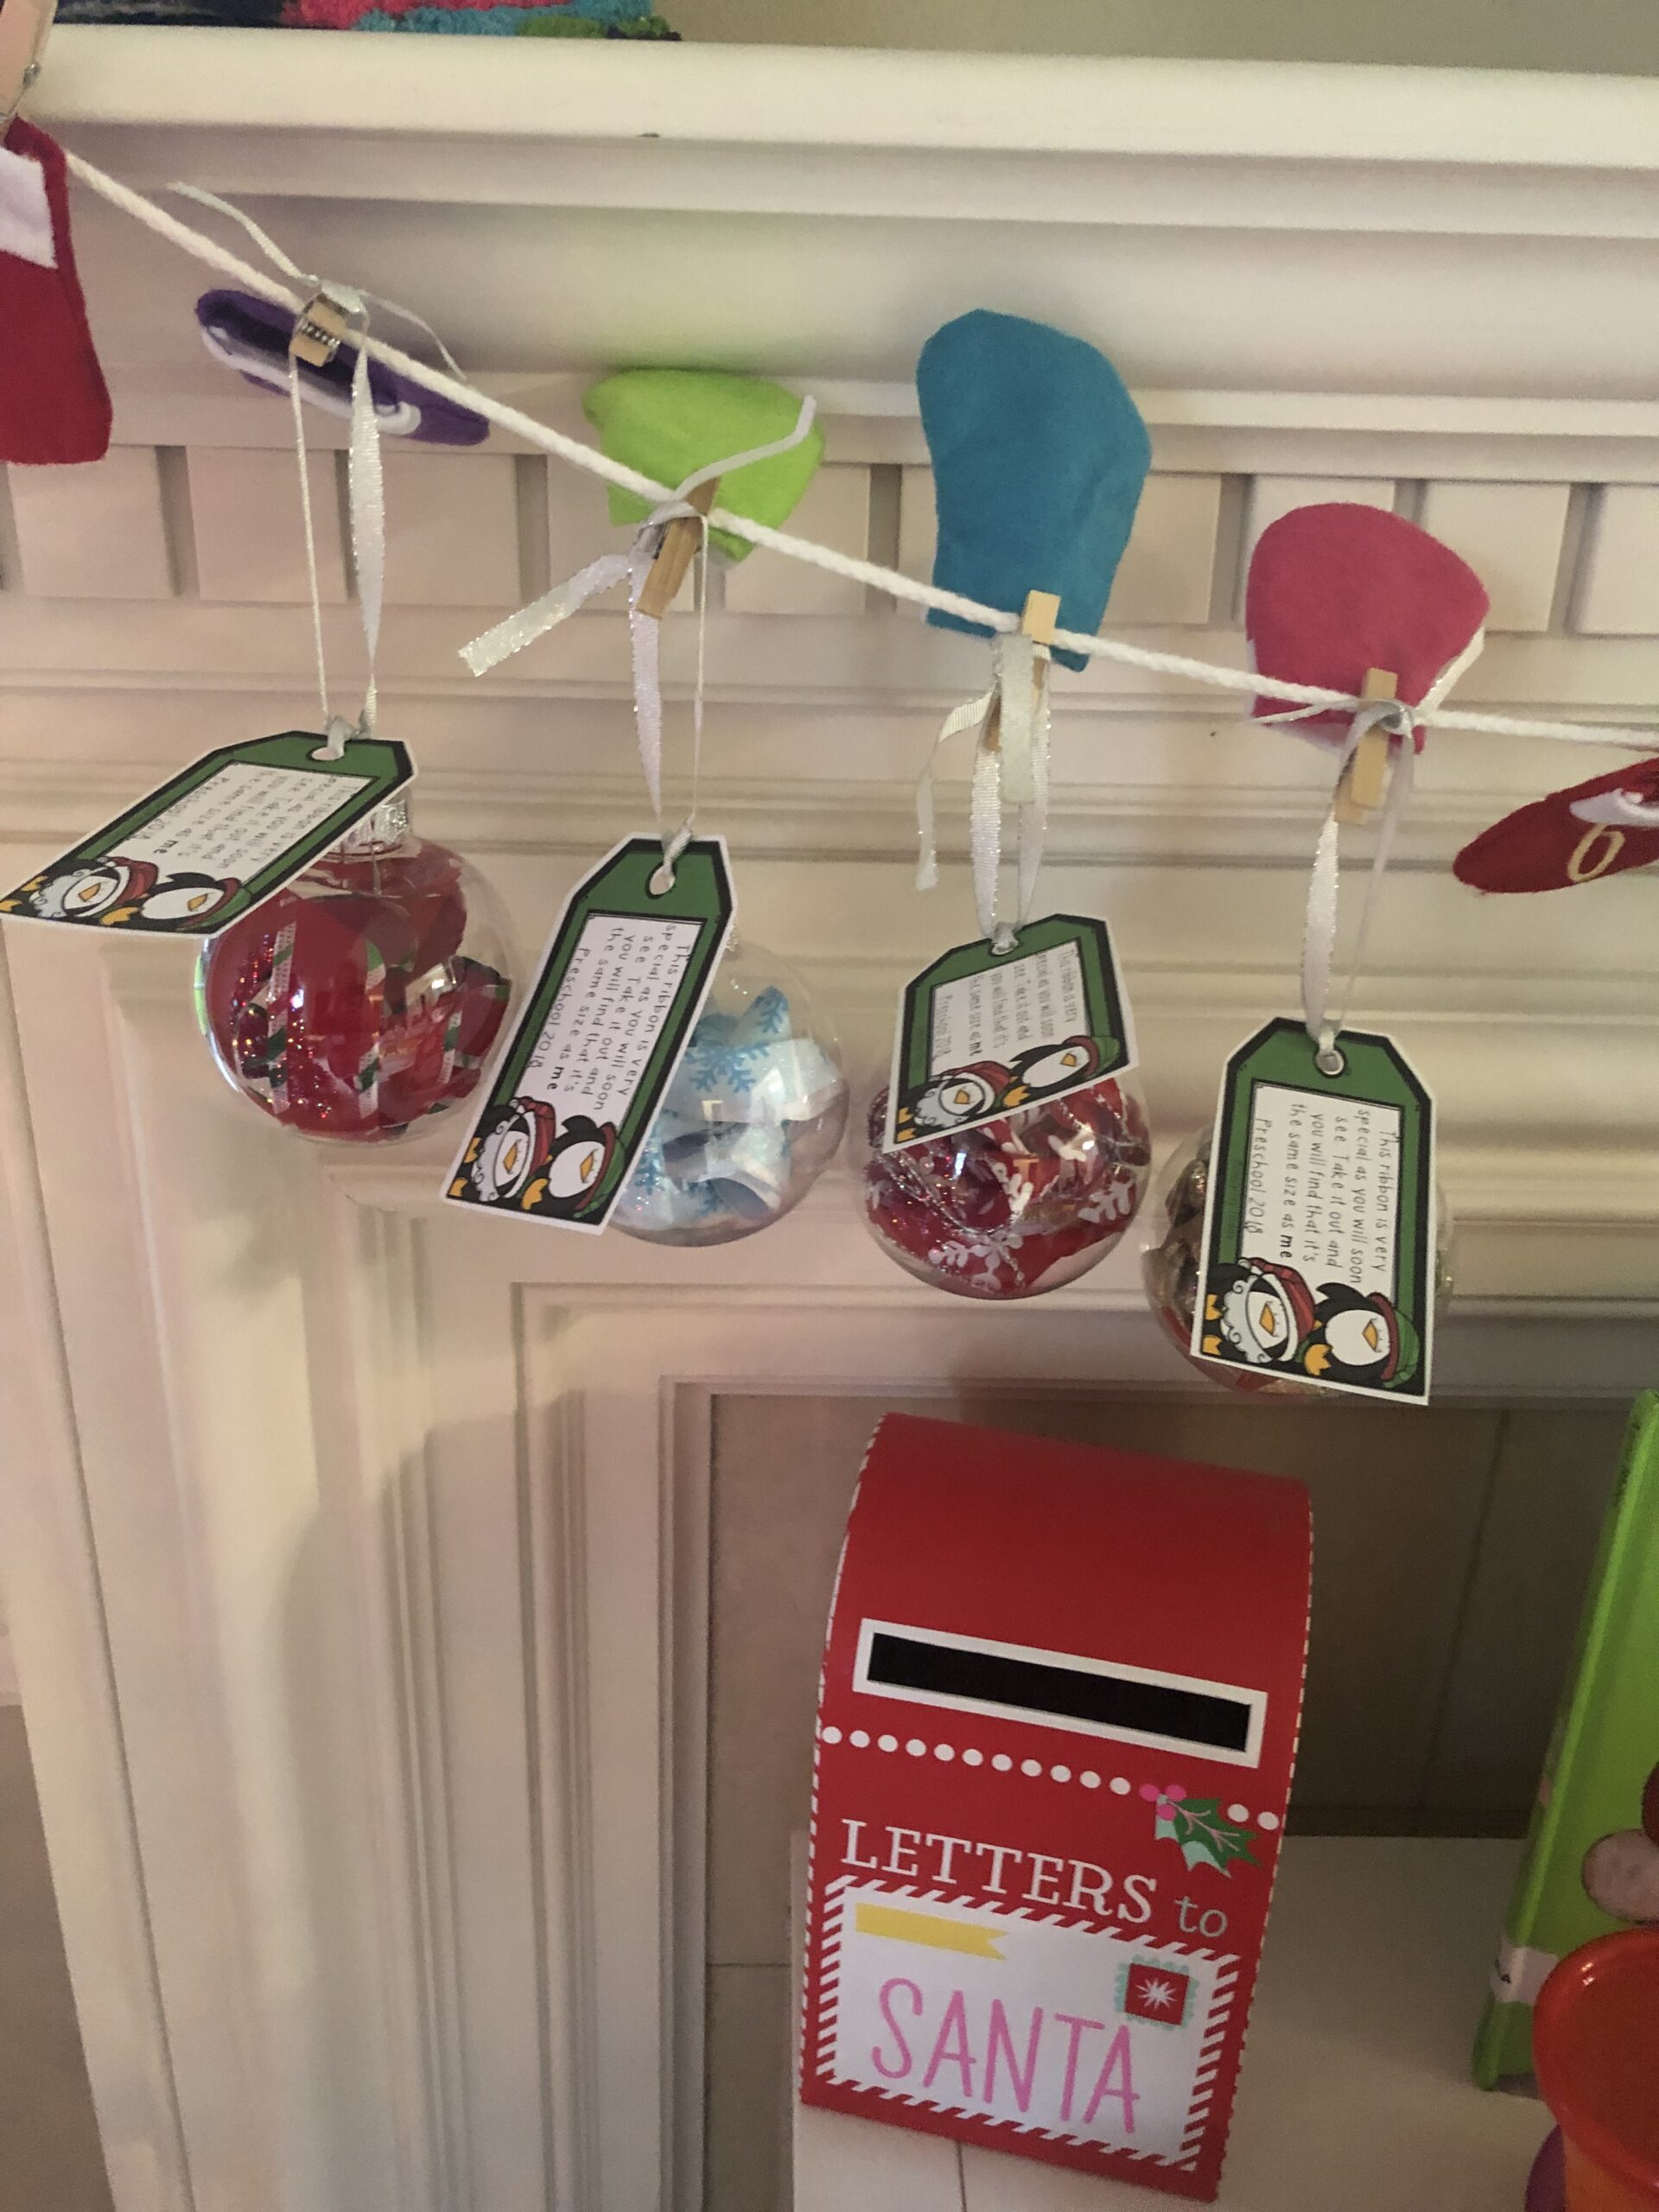 Want to make a sweet gift for Grandparents or as a school gift for families? Check out how to make these simple DIY ornaments!